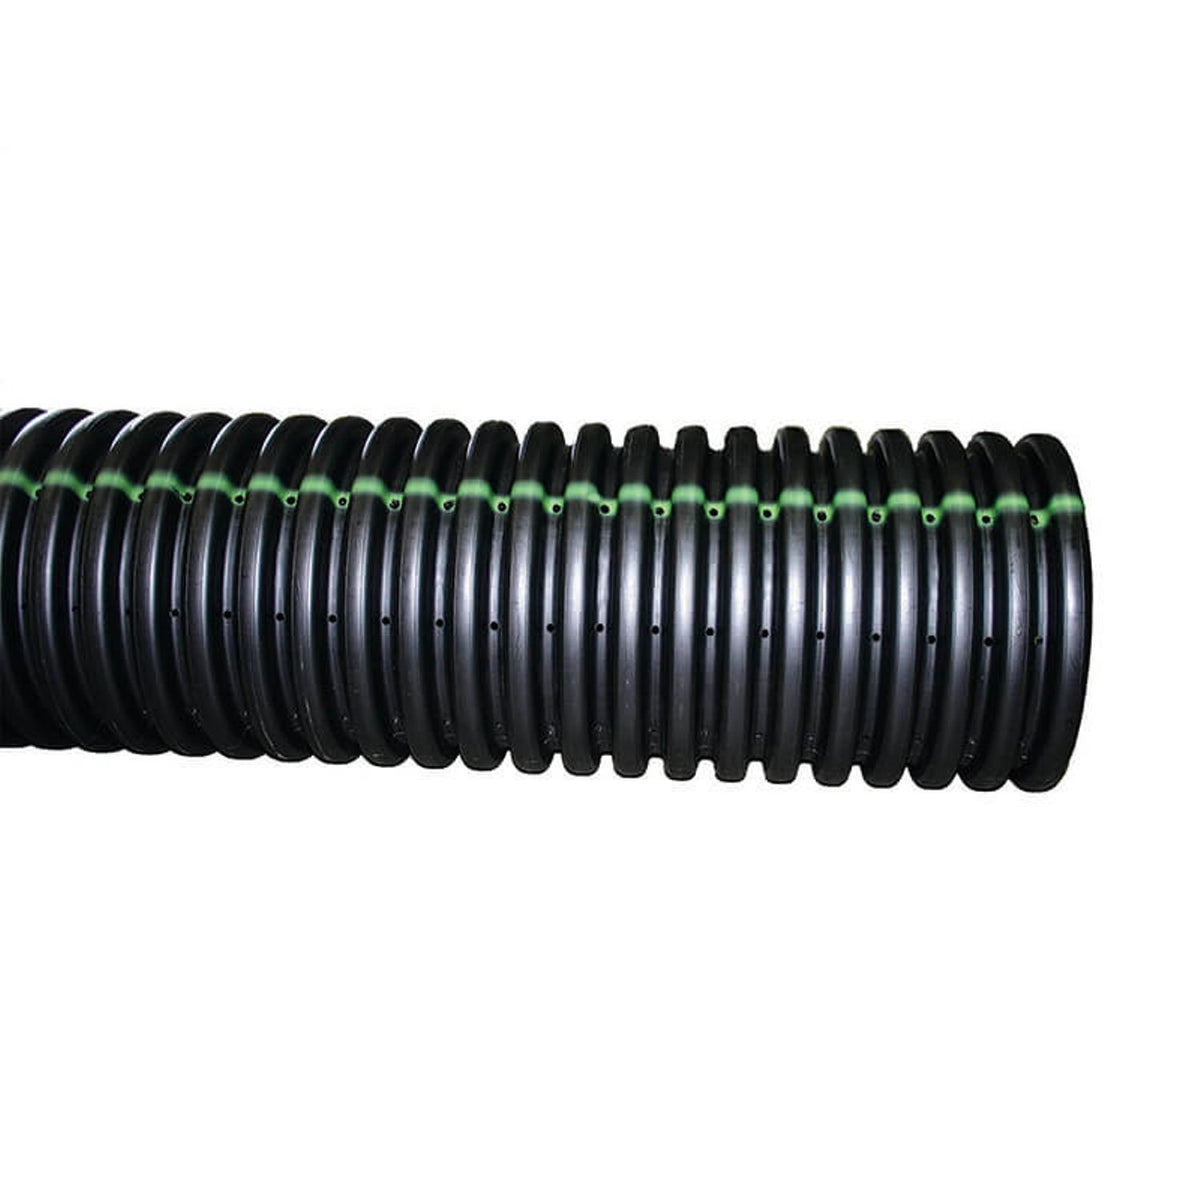 Neat Distributing HDPE Dual-Wall Perforated Culvert Pipe (price is subject to freight)